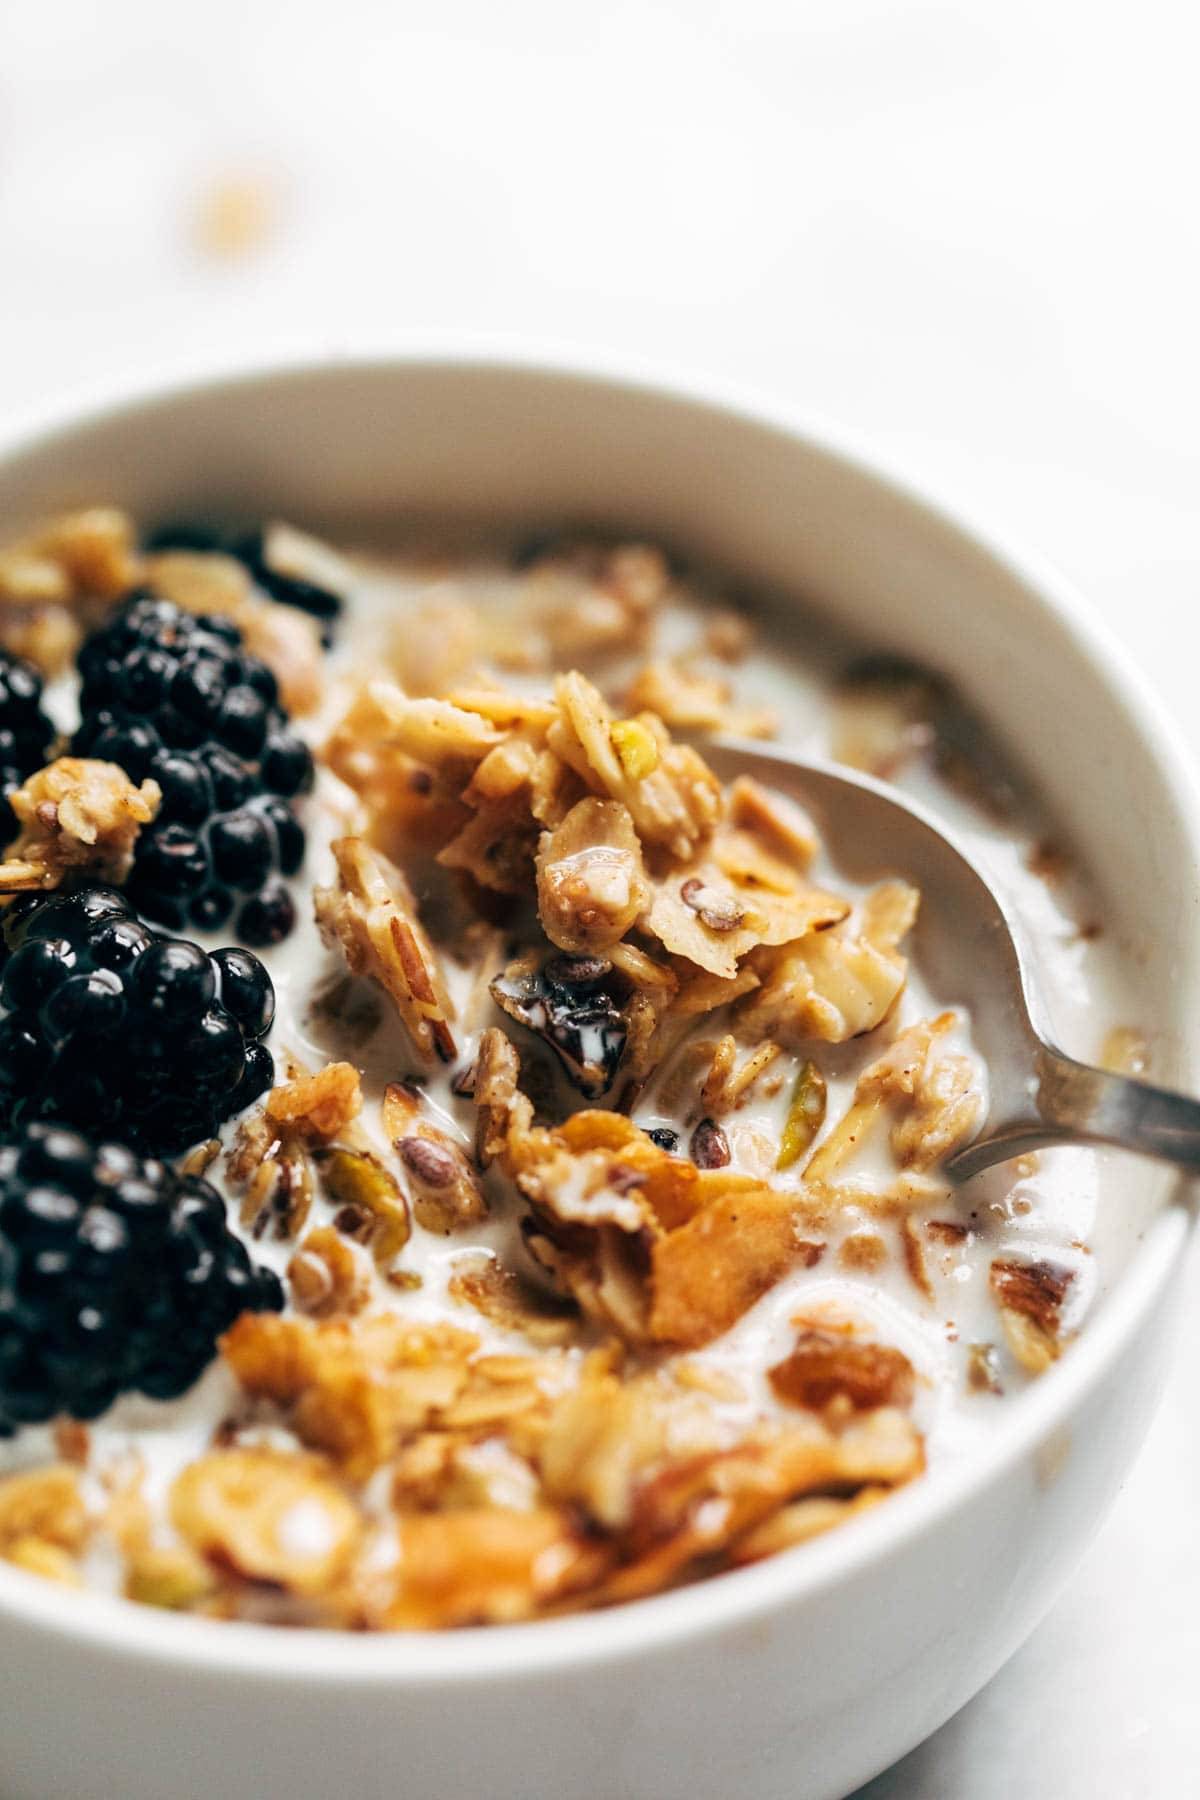 Coconut oil granola in a bowl with milk and berries.